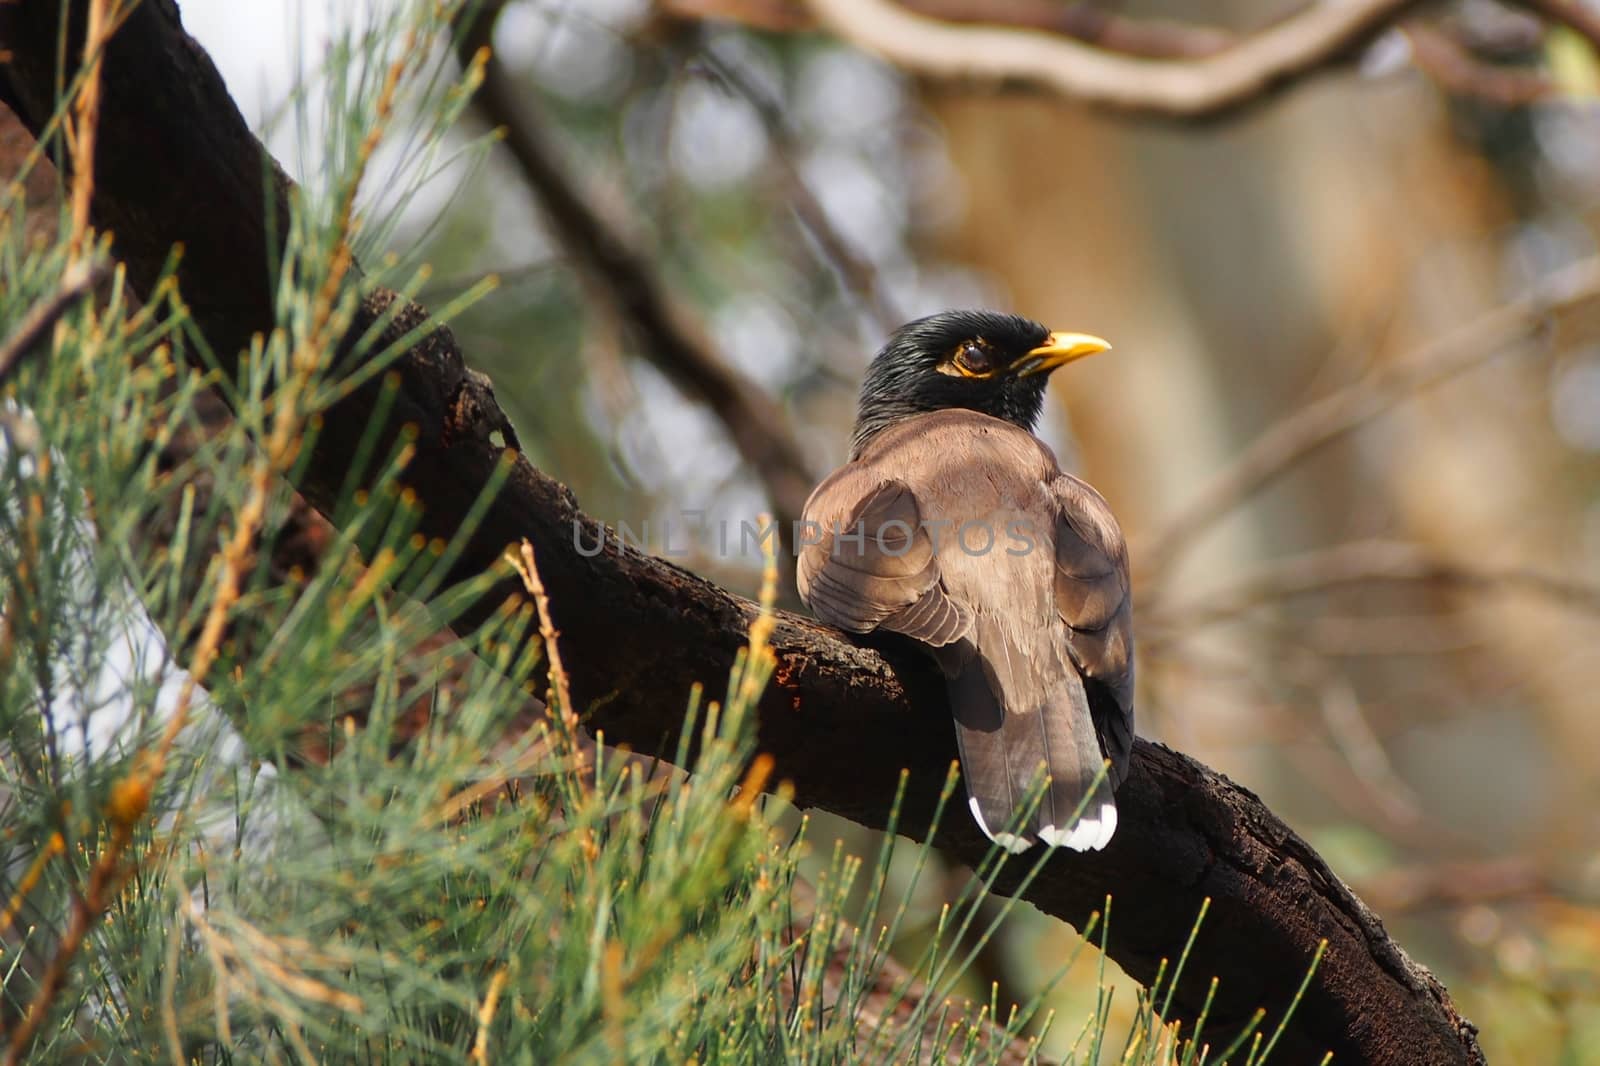 The Common Myna Bird perched on a branch